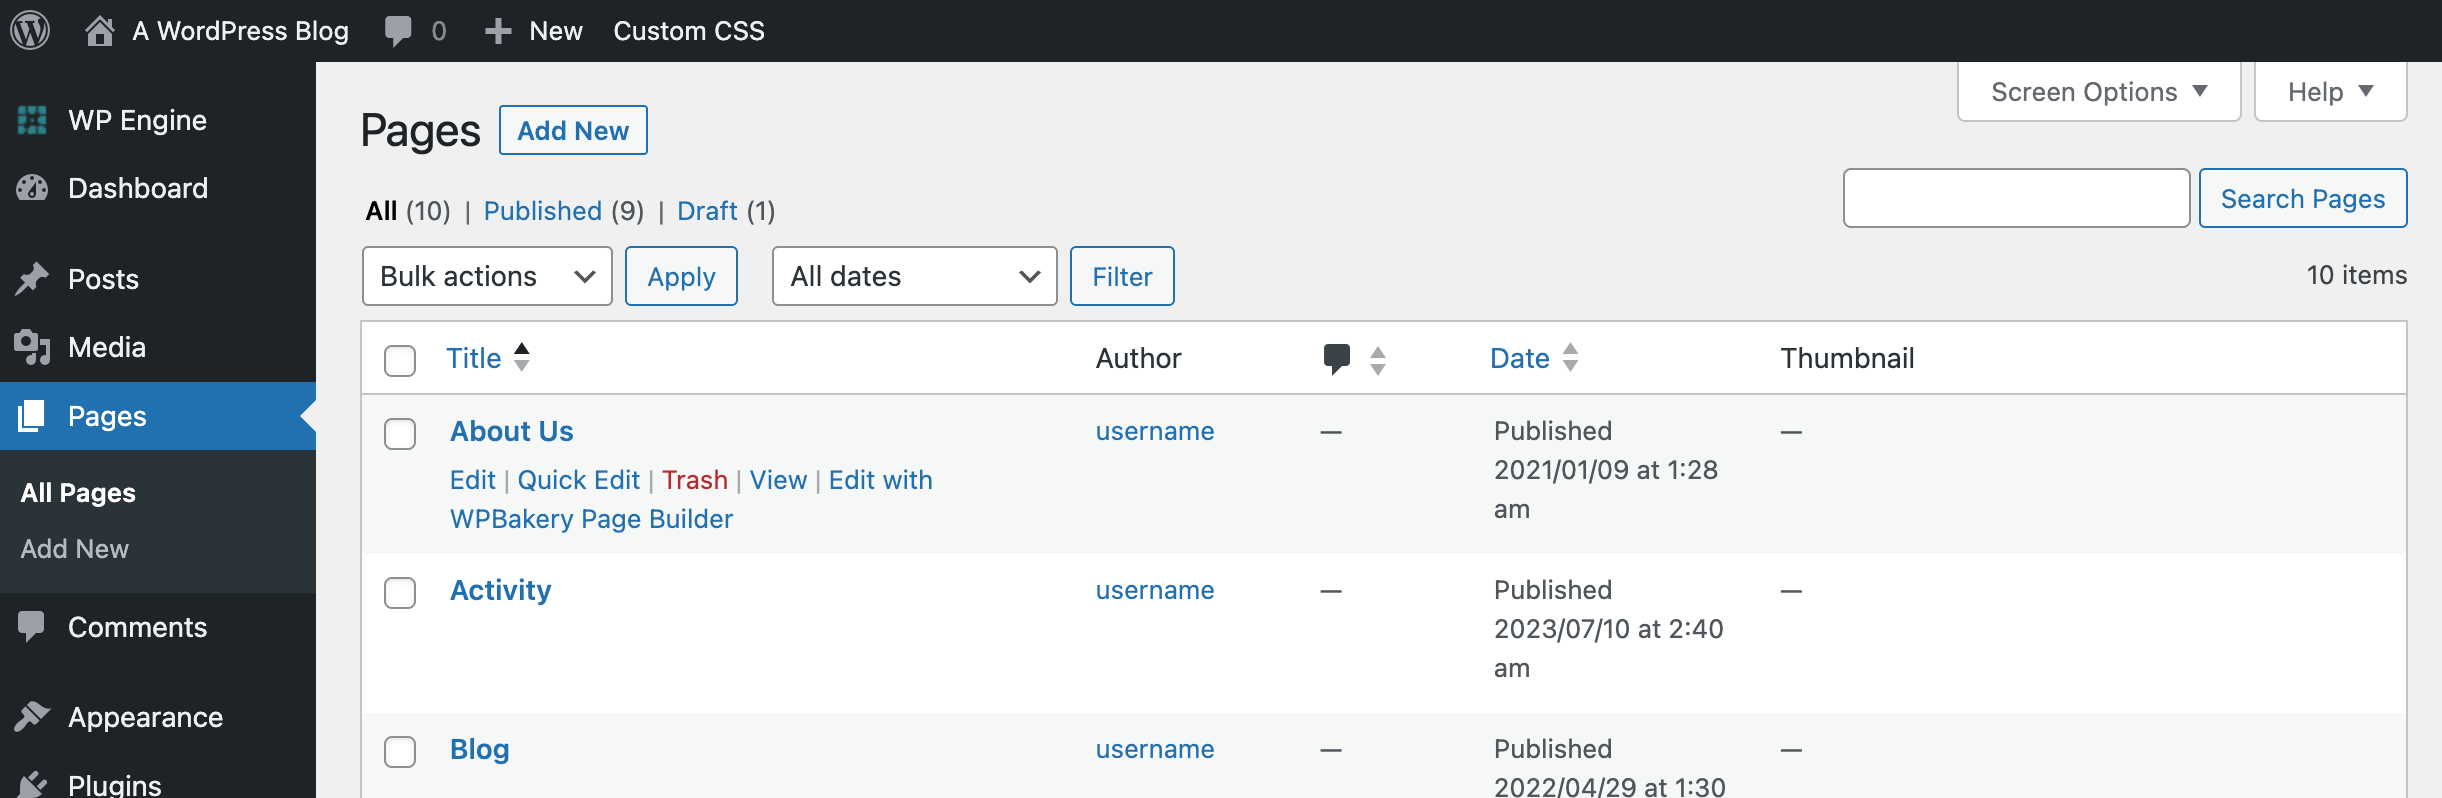 WordPress Dashboard: Pages